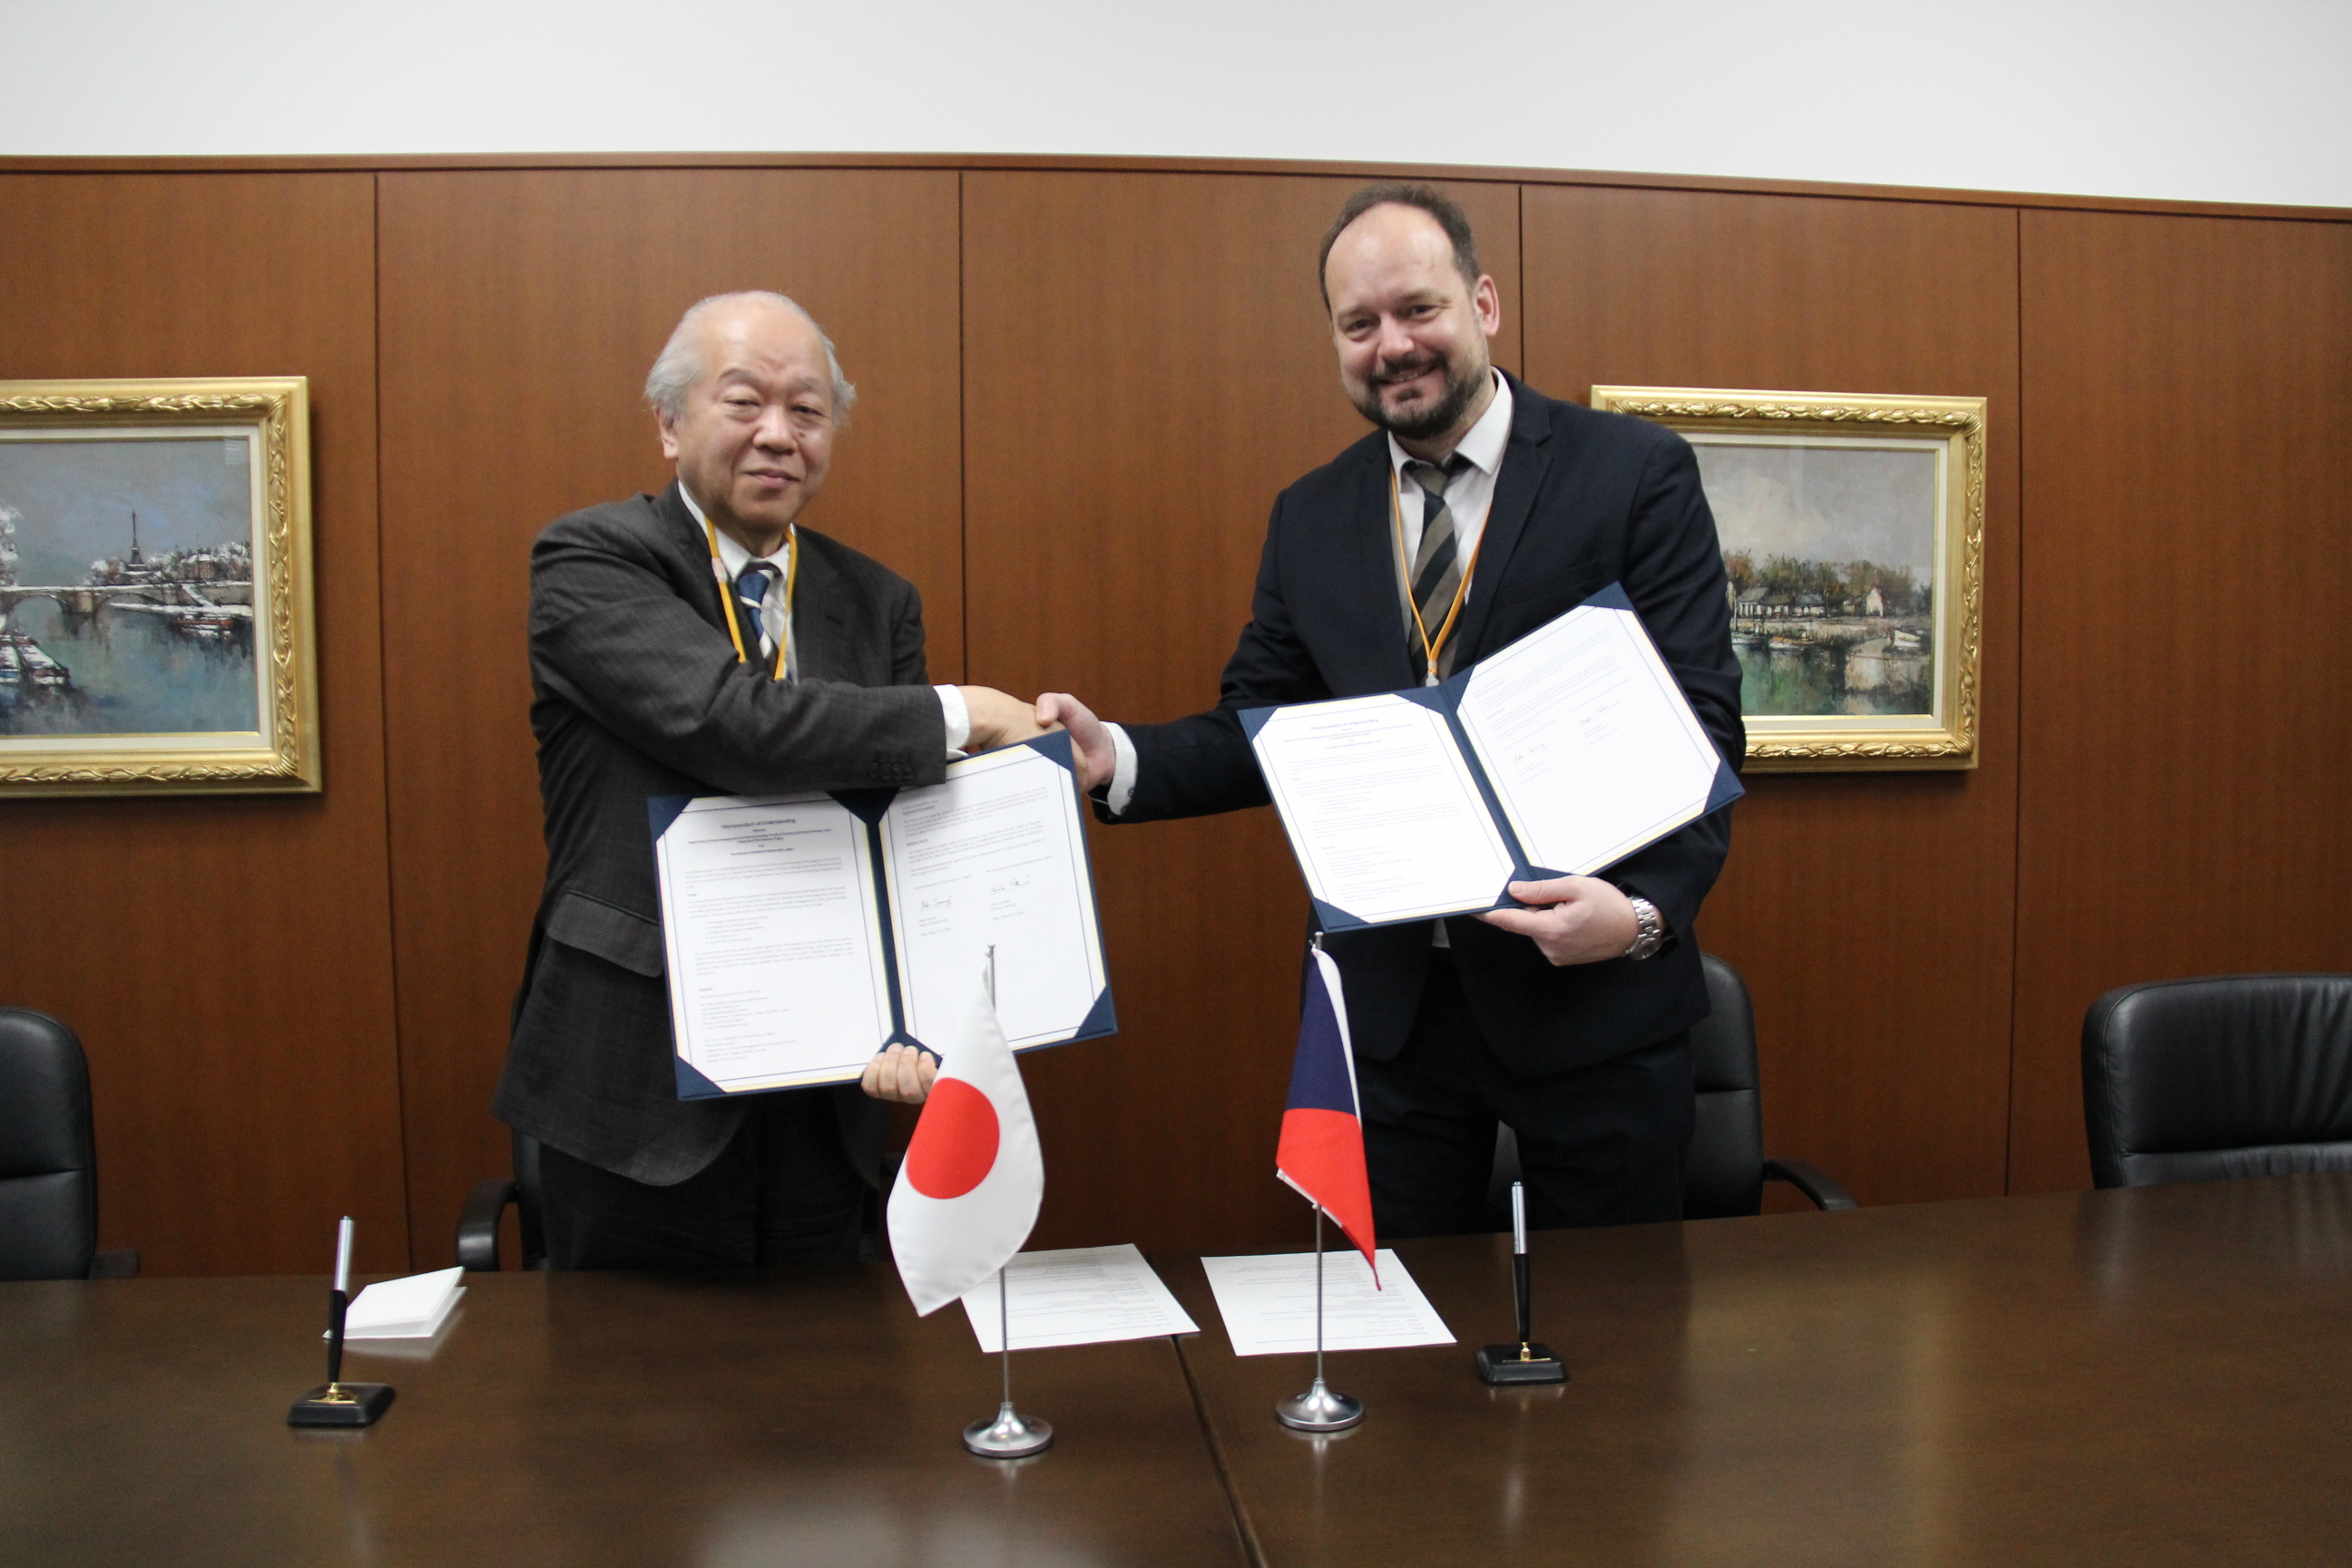 Prof. Tsubaki and Prof. Surovy shaking their hands with the MOU.